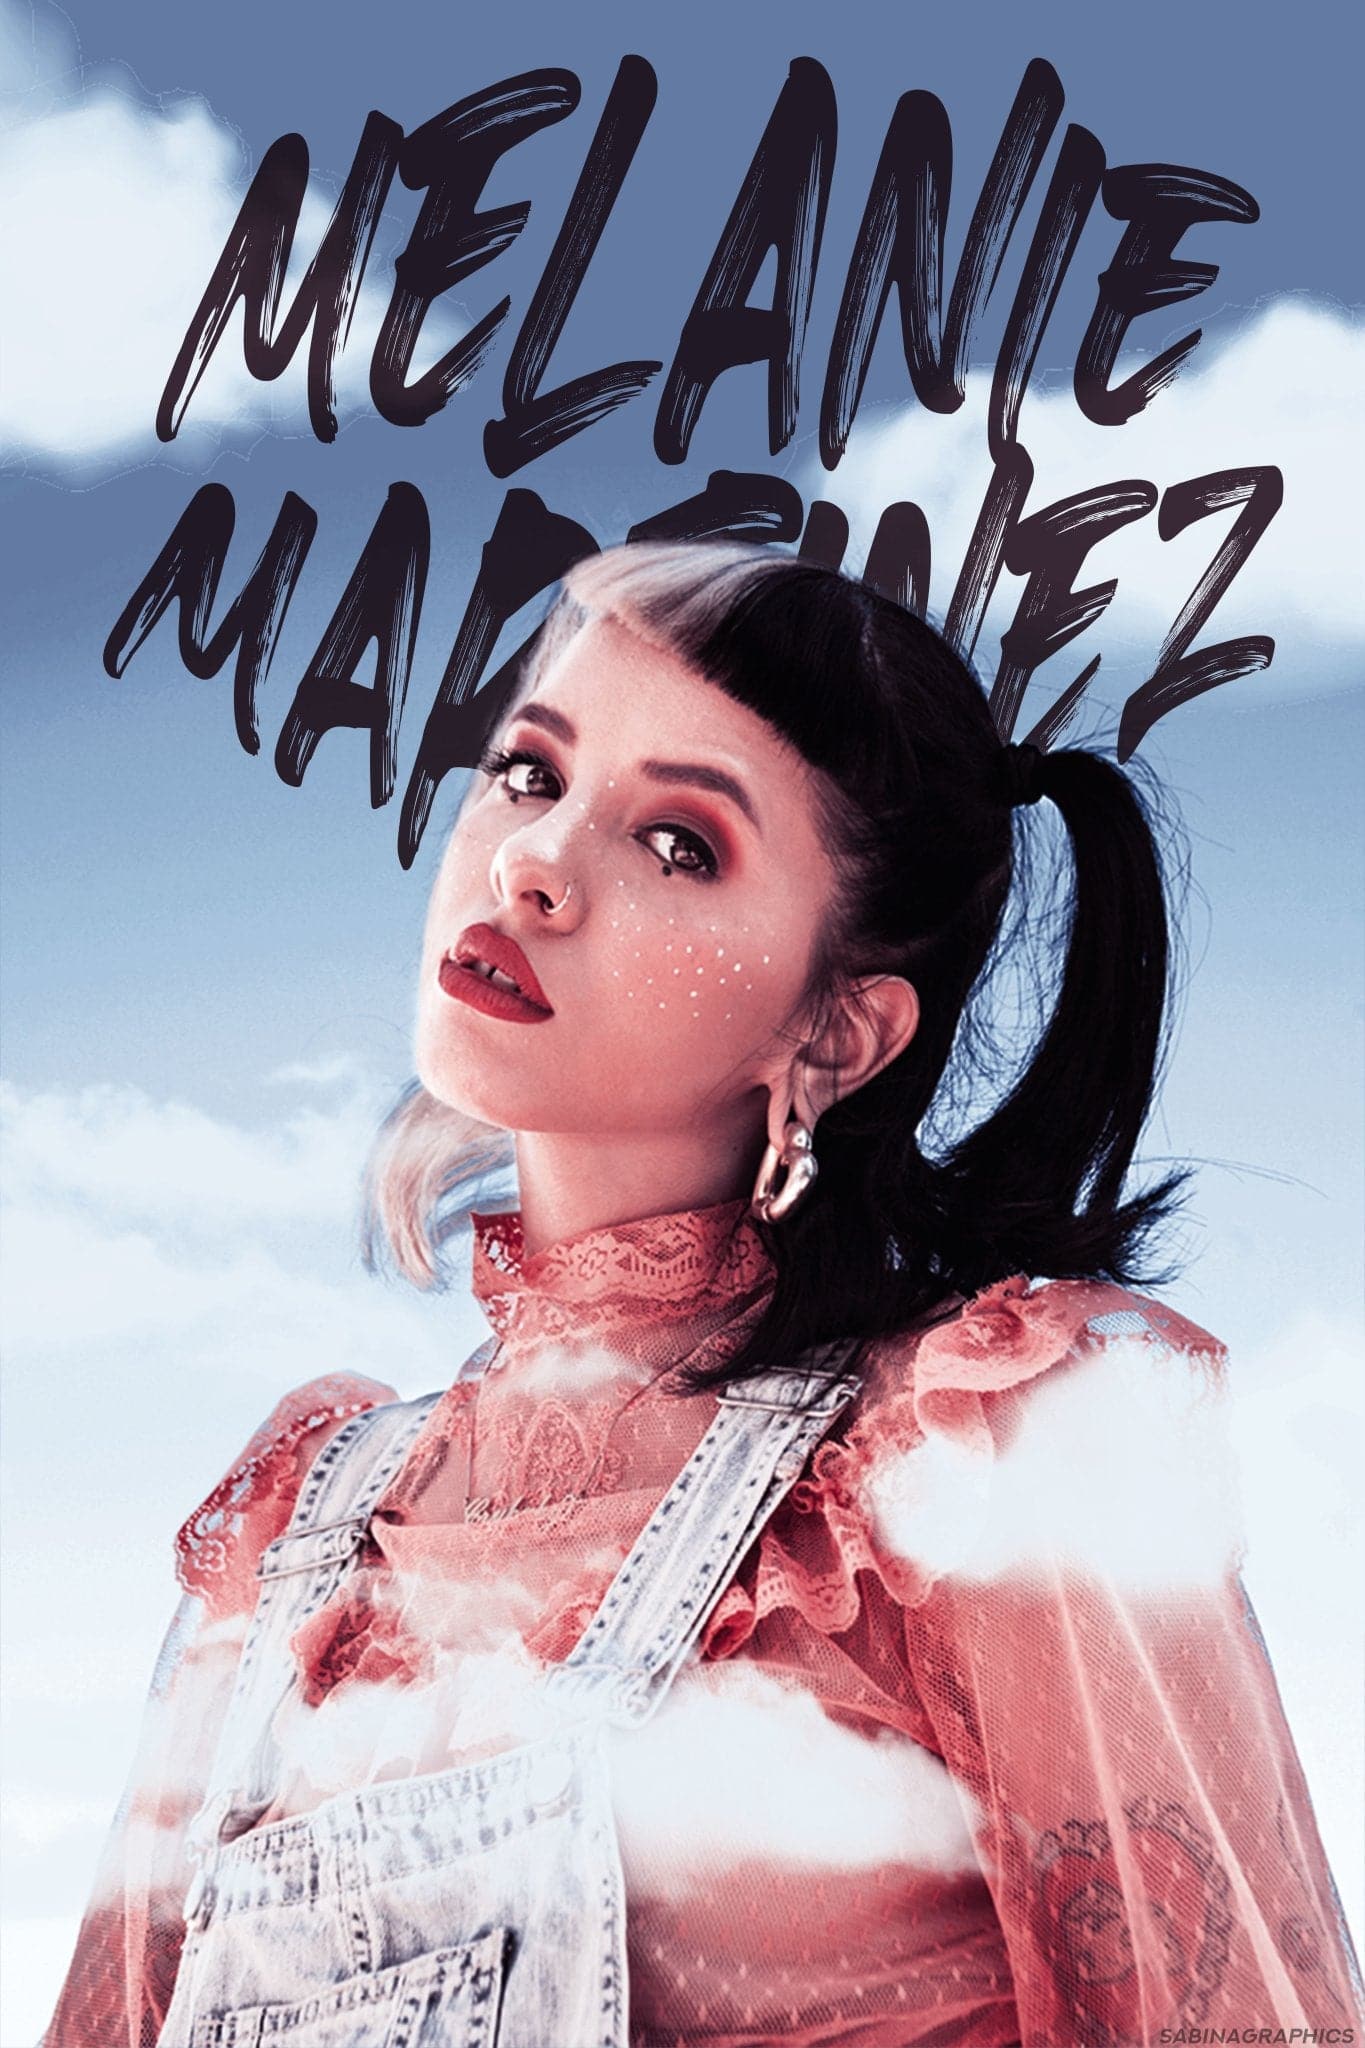 Melanie Martinez 'Clouds In The Sky' Poster – Posters Plug